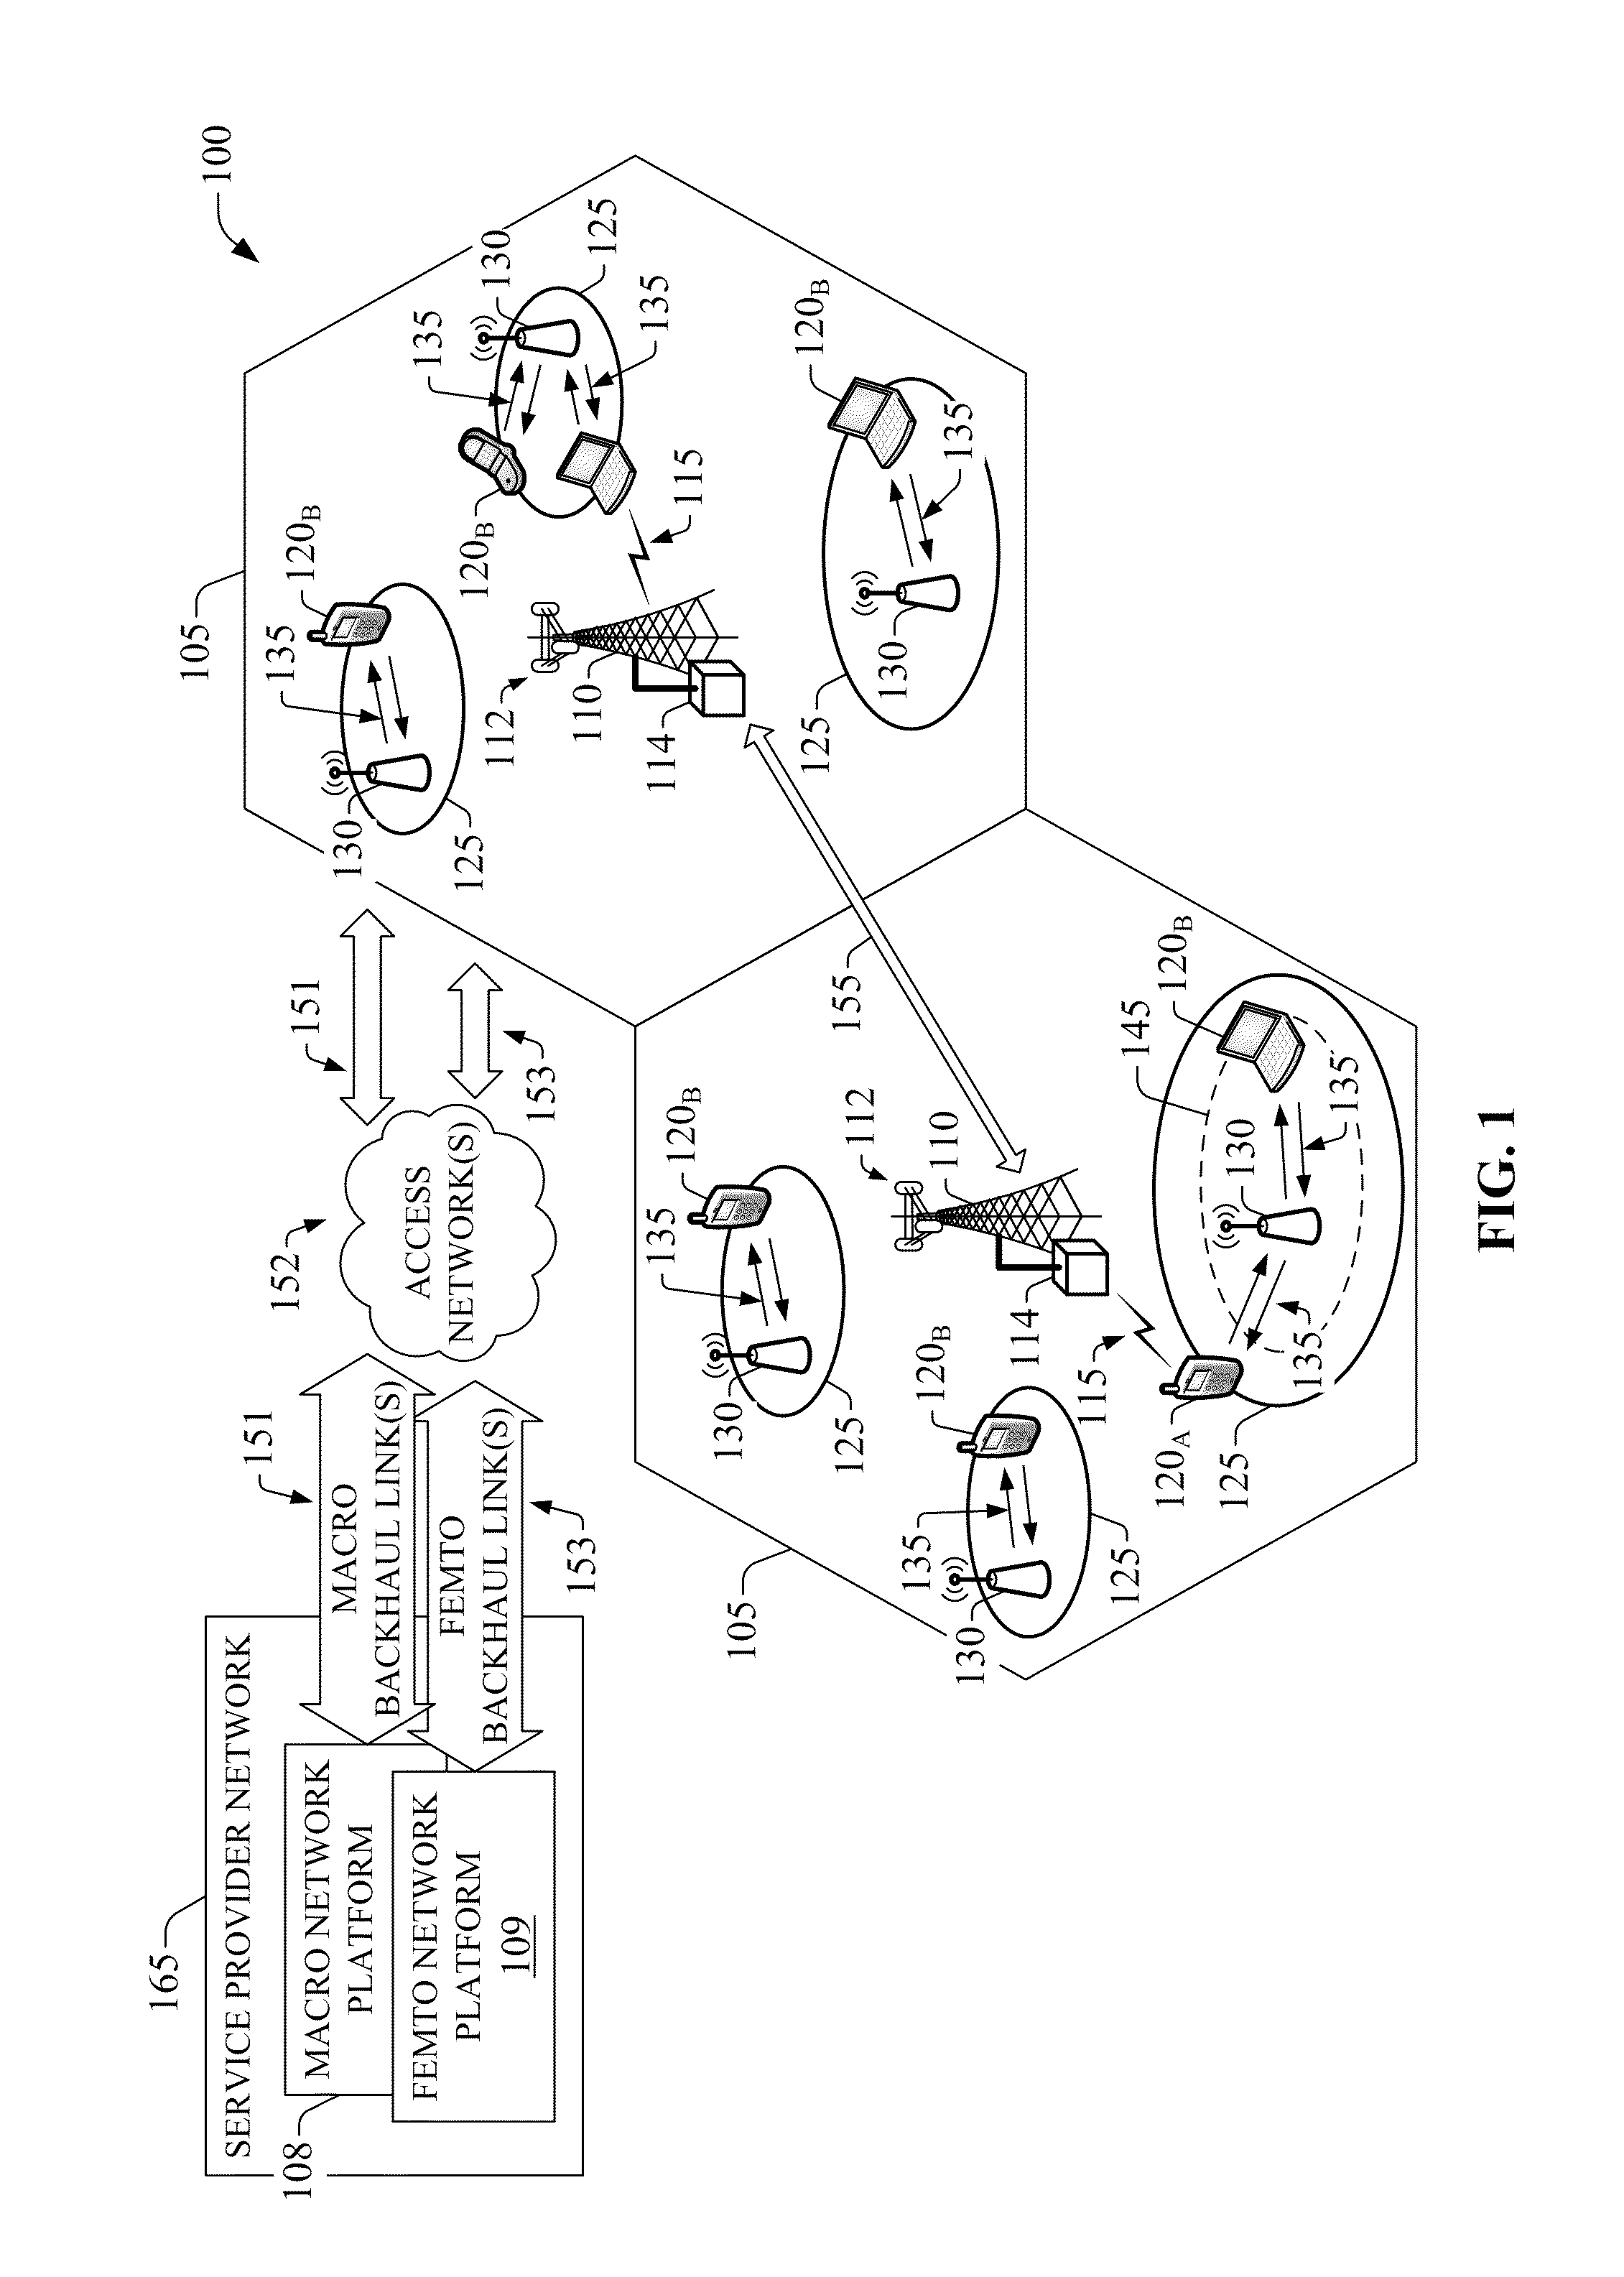 Presence-based communication routing service and regulation of same